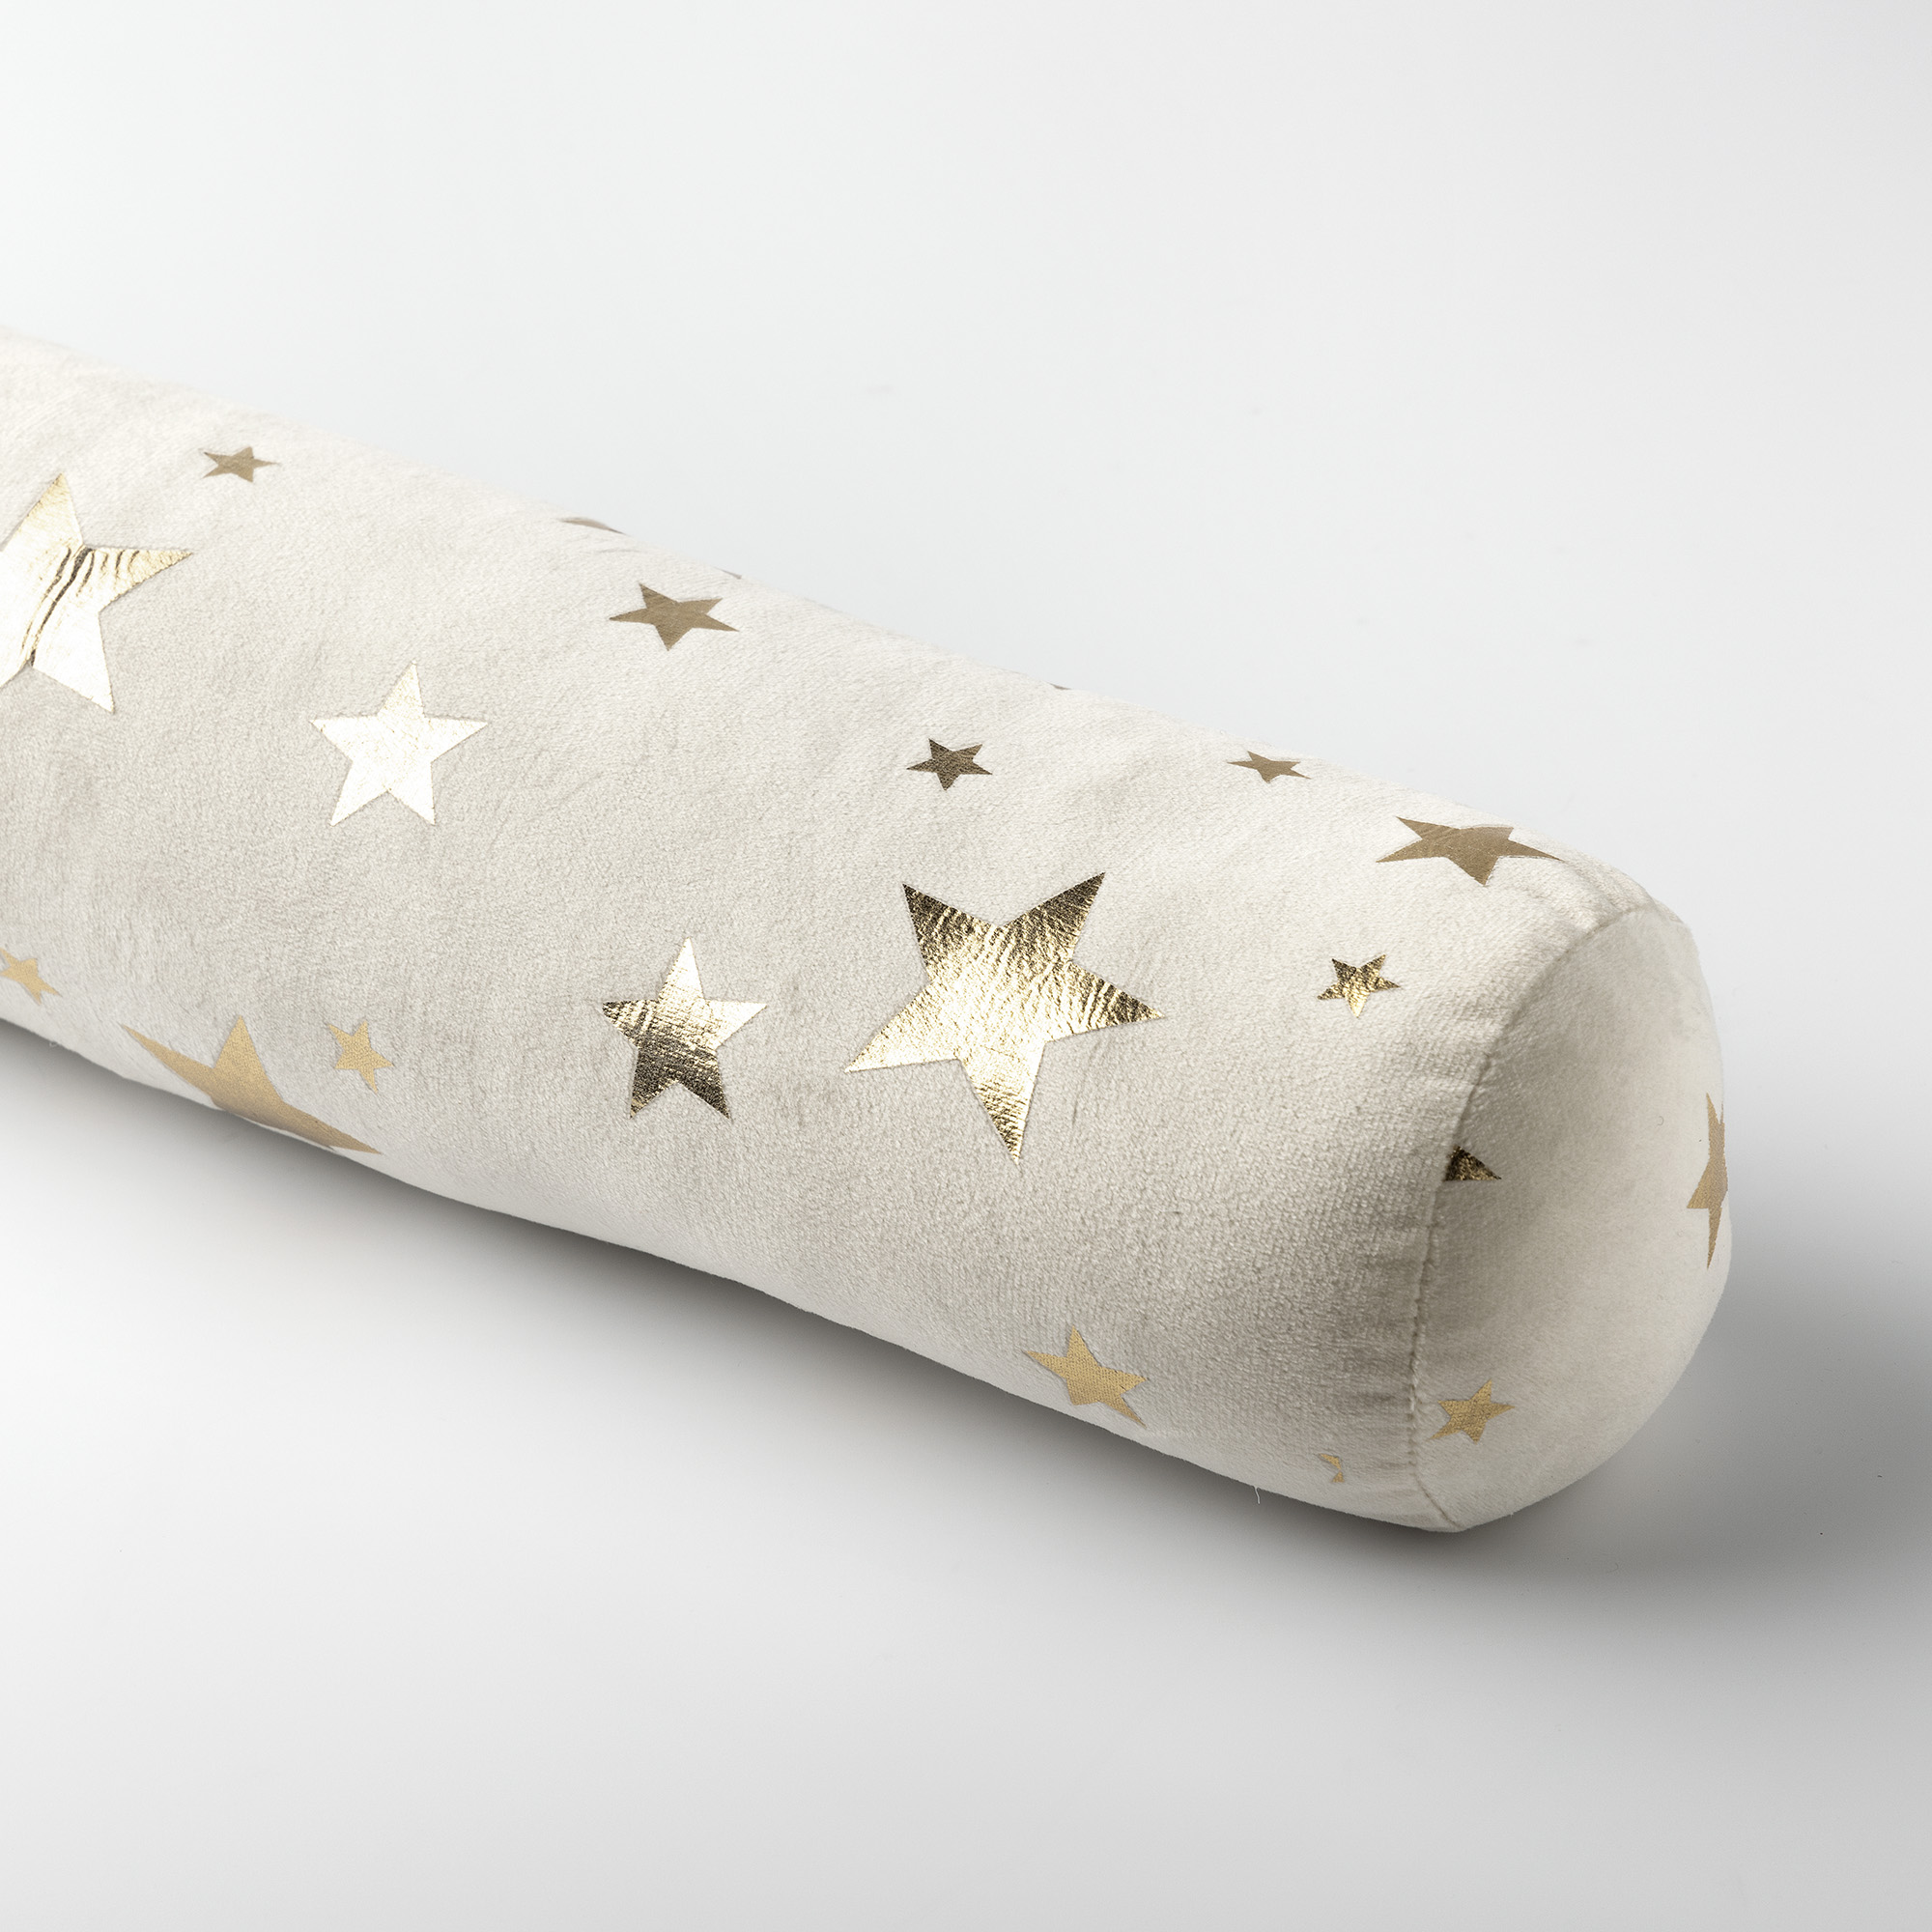 STARS - Draught excluder 90x10 cm - Door draught excluder with stars - Whisper White - white